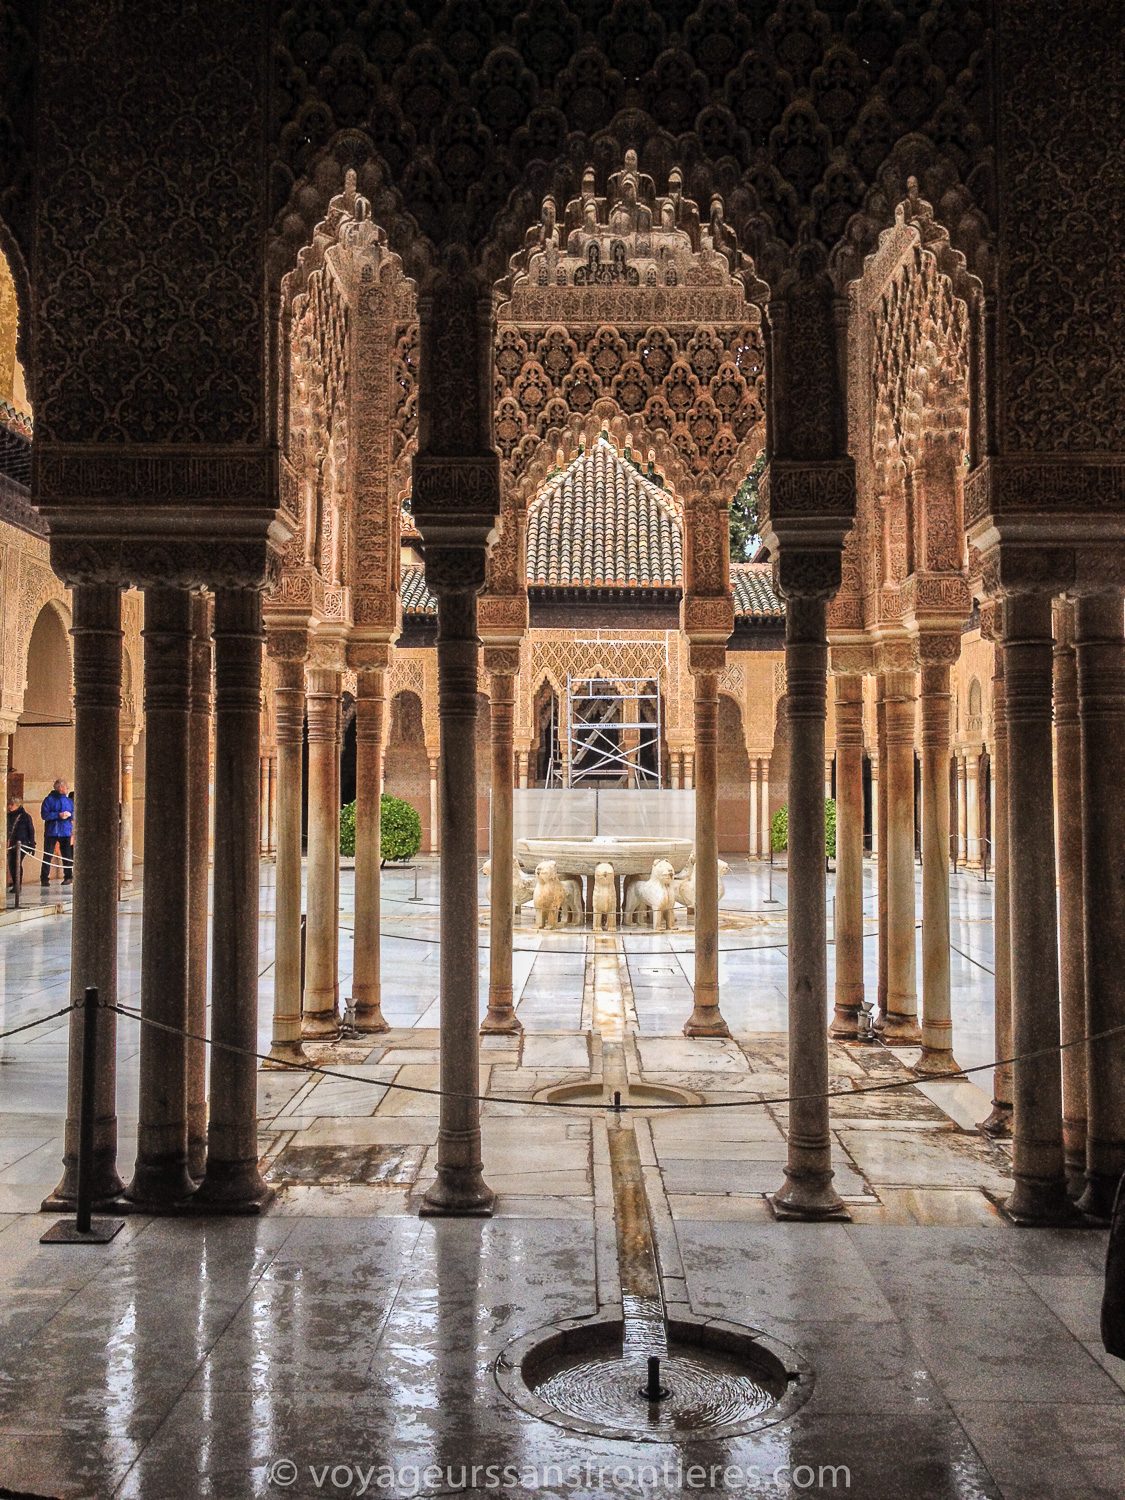 Inside the Nasrid Palaces at the Alhambra - Granada, Spain